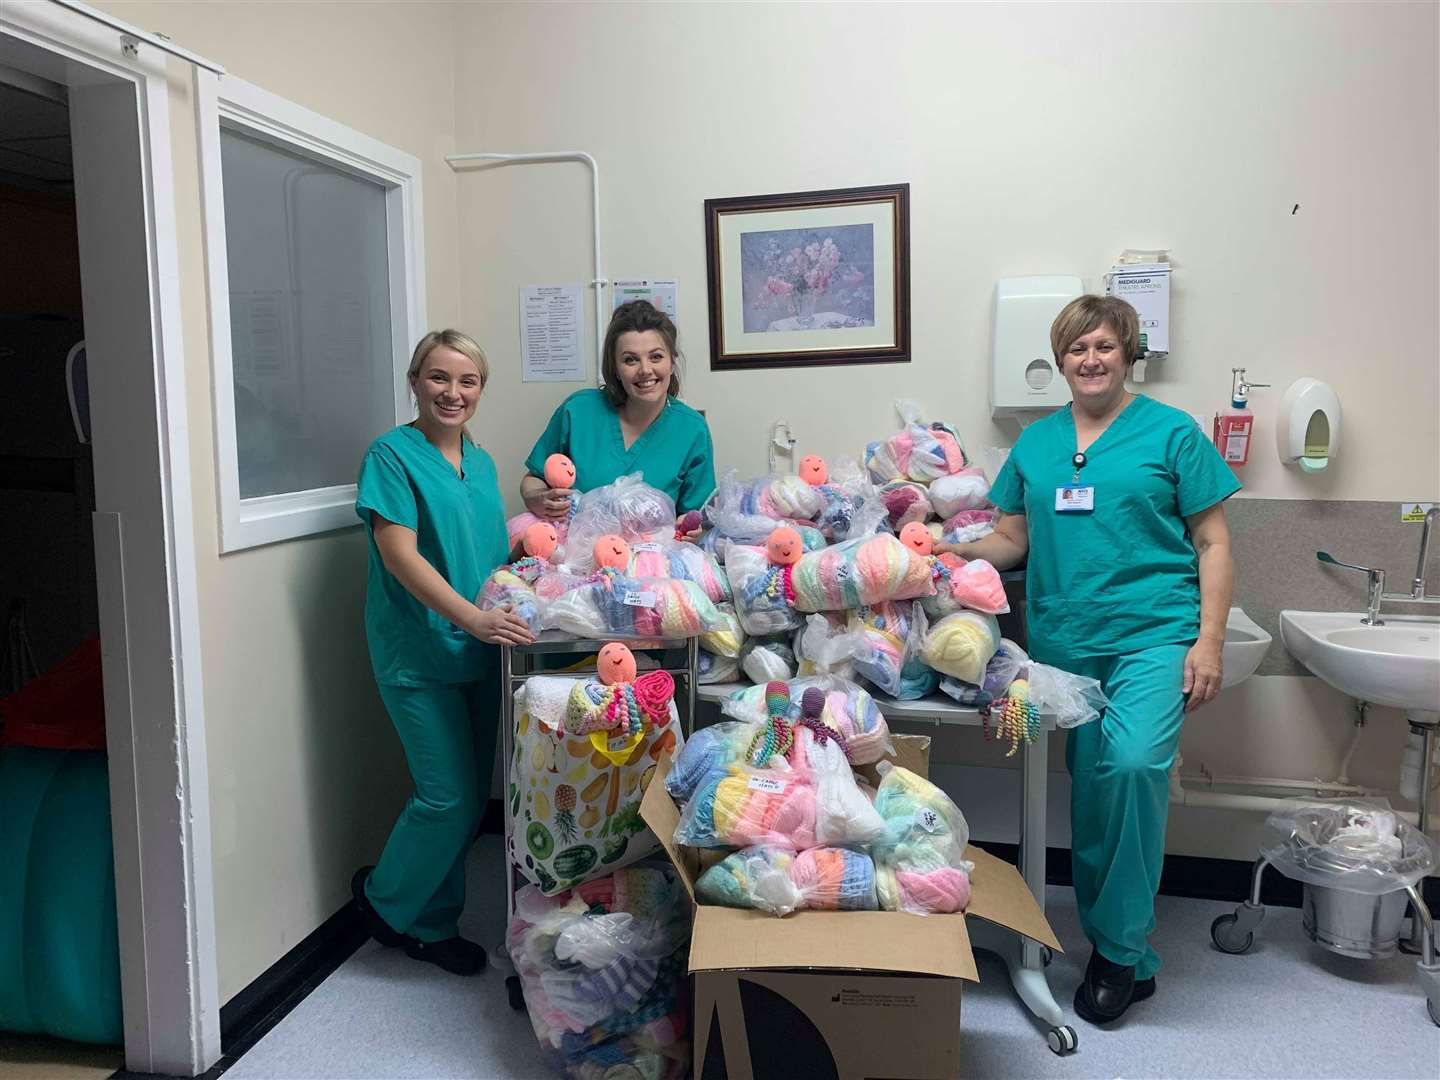 In December last year, Raigmore Hospital's maternity ward was overwhelmed by the response to an appeal for knitted hats.